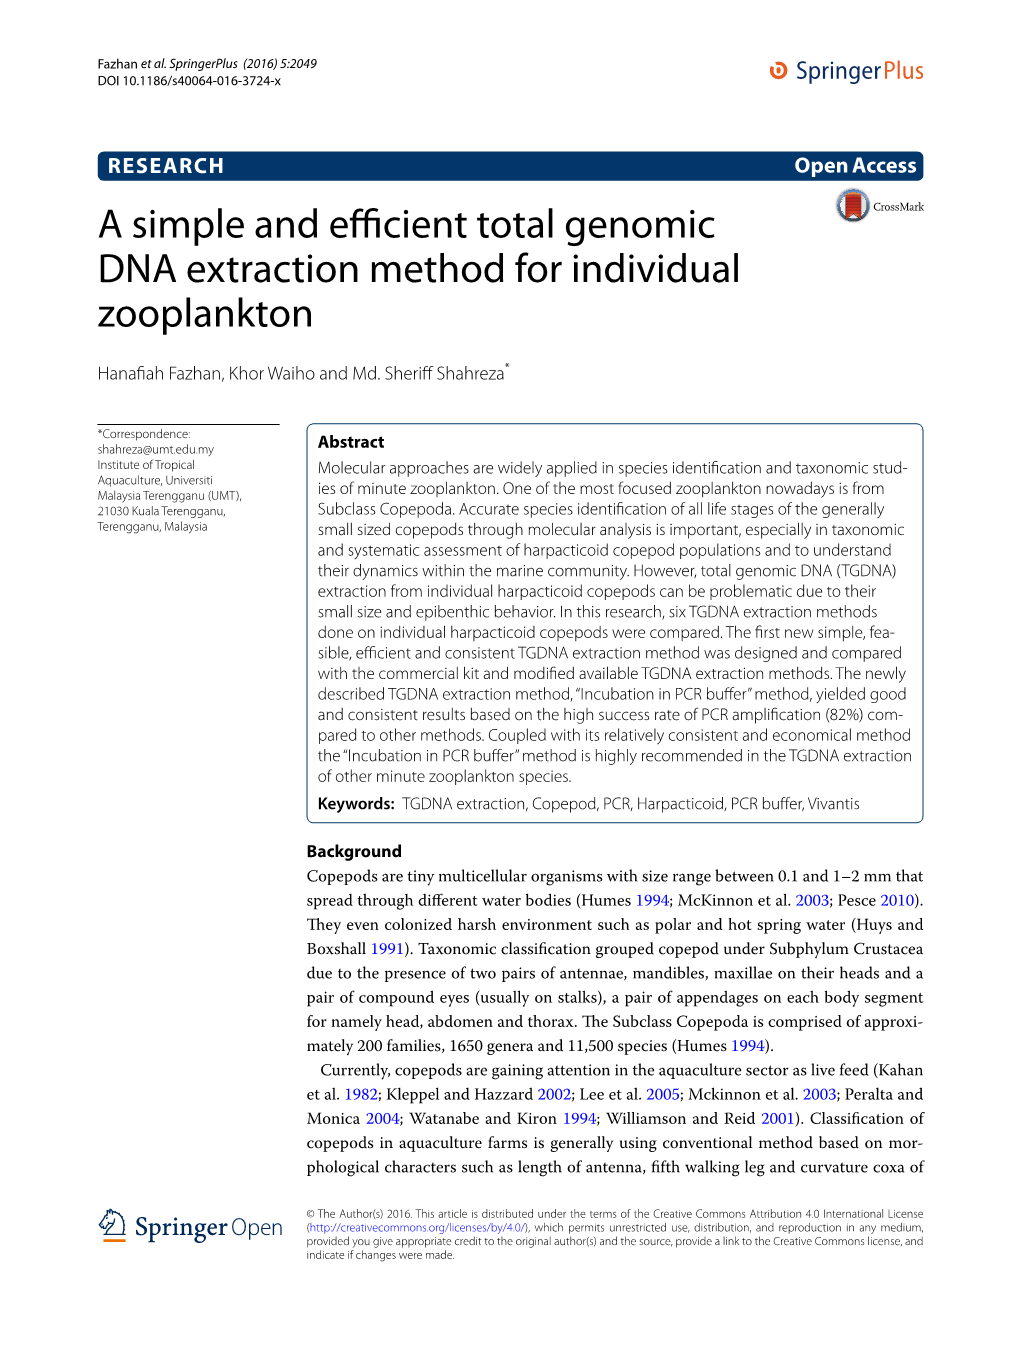 A Simple and Efficient Total Genomic DNA Extraction Method for Individual Zooplankton